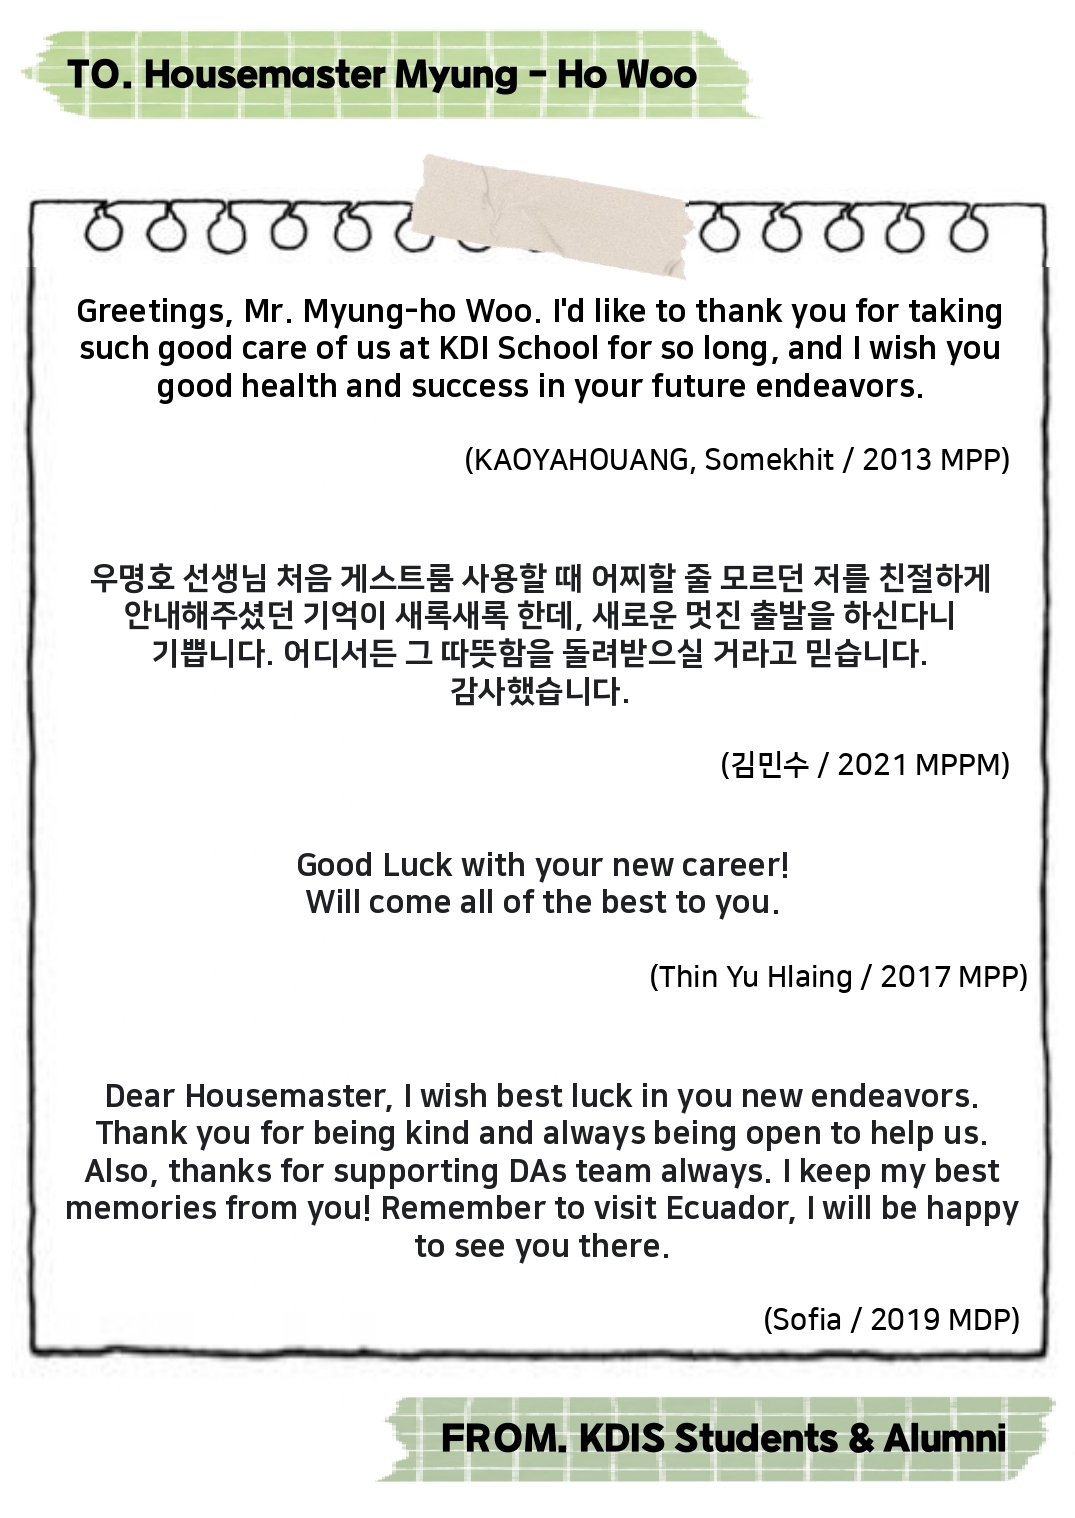 Thank you Housemaster Myung-ho Woo -Messages from KDIS Students and Alumni 사진31